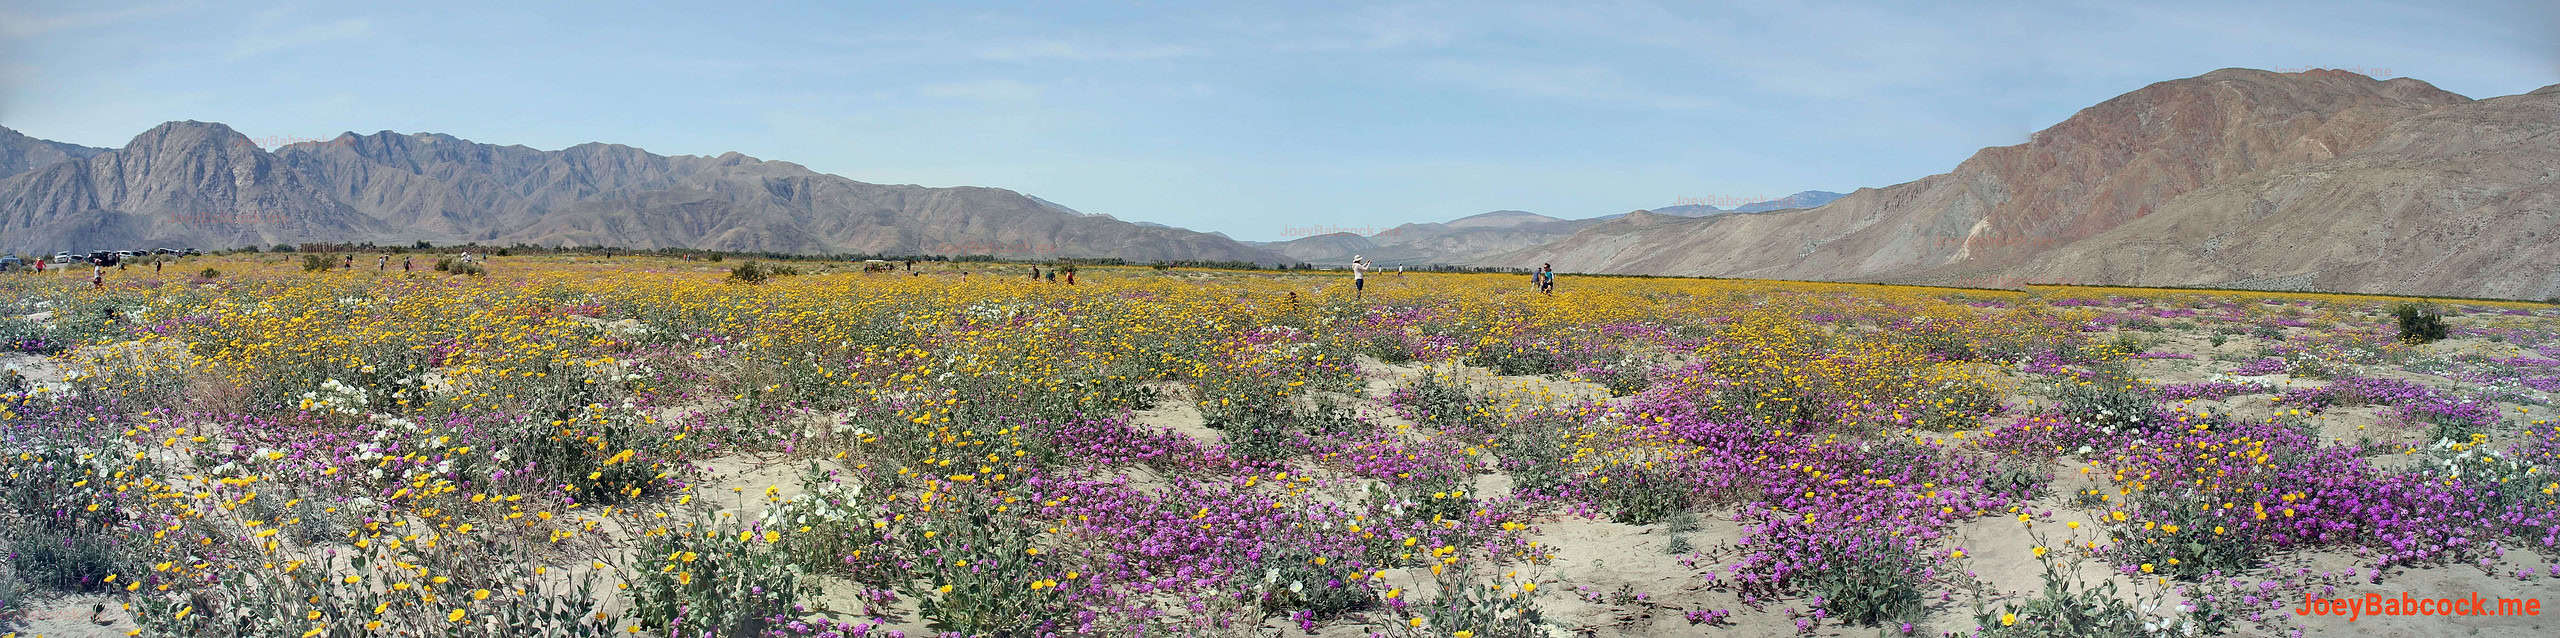 Flowers stretching in 360 degrees. (c) Joey Babcock March 2024 - Borrego Springs, CA